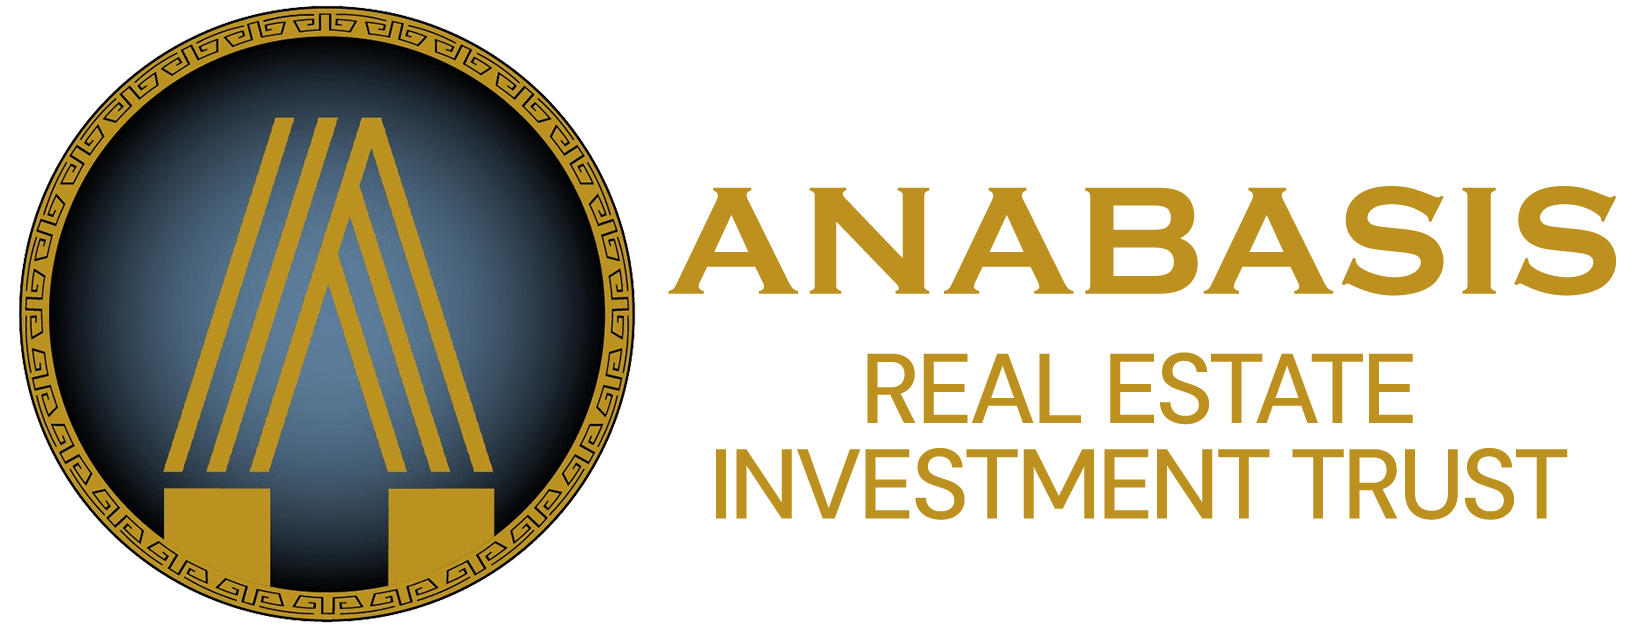 Anabasis Real Estate Investment Trust